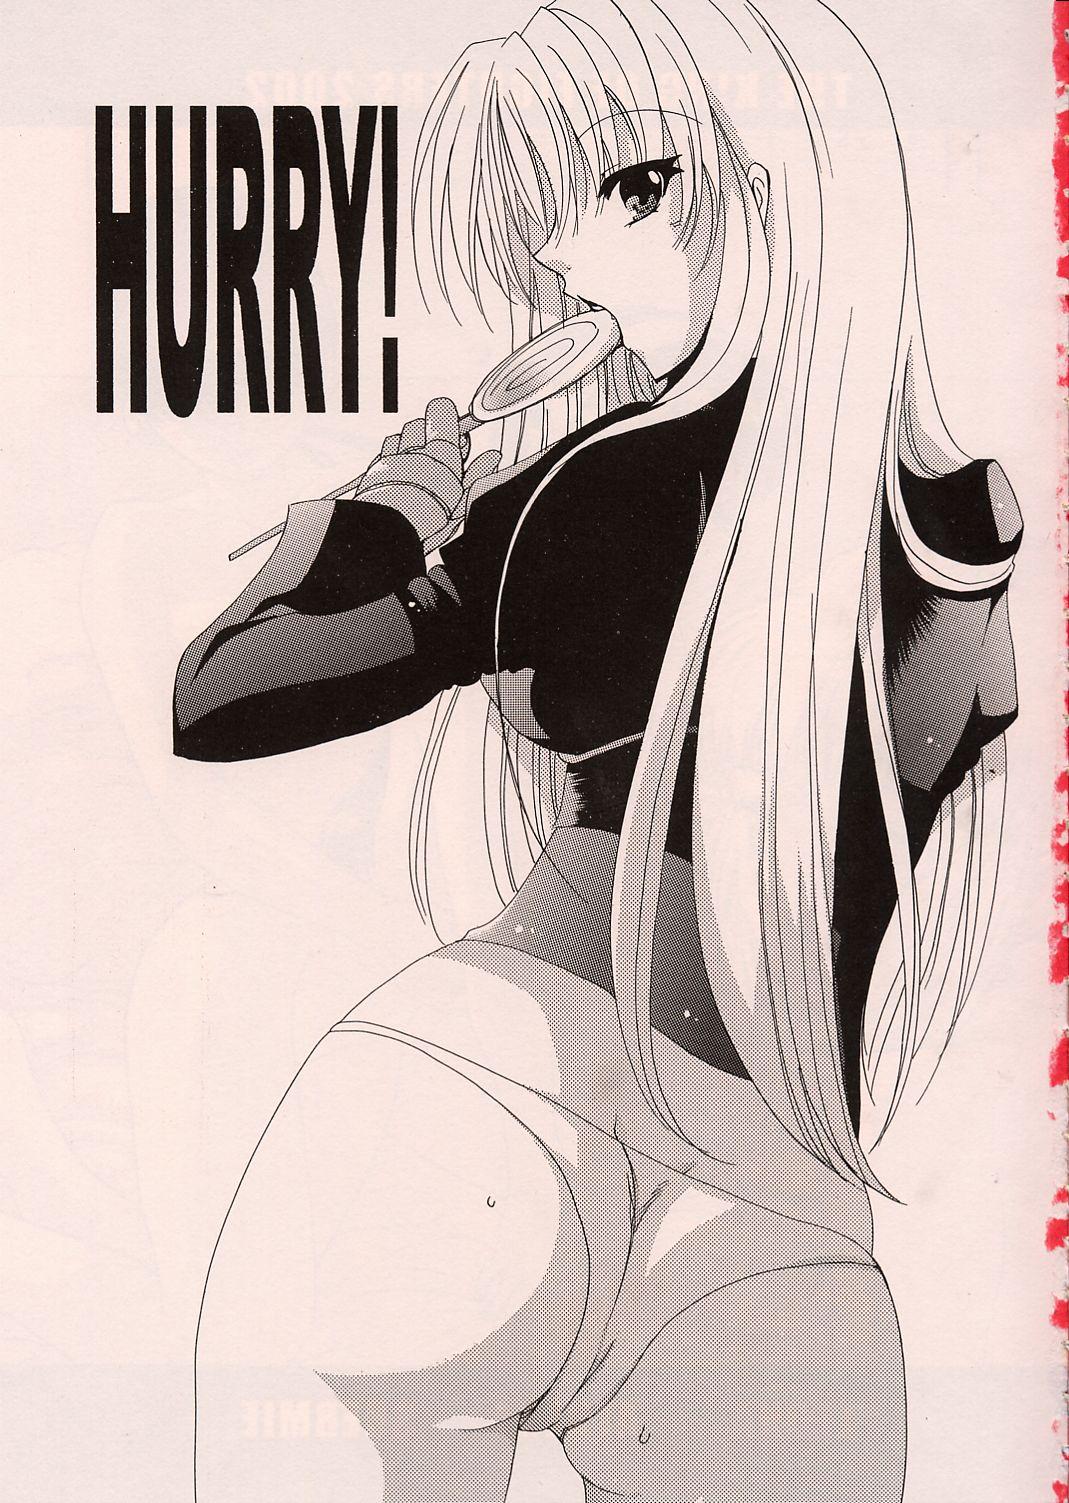 Chastity HURRY! - King of fighters 18 Year Old - Page 2